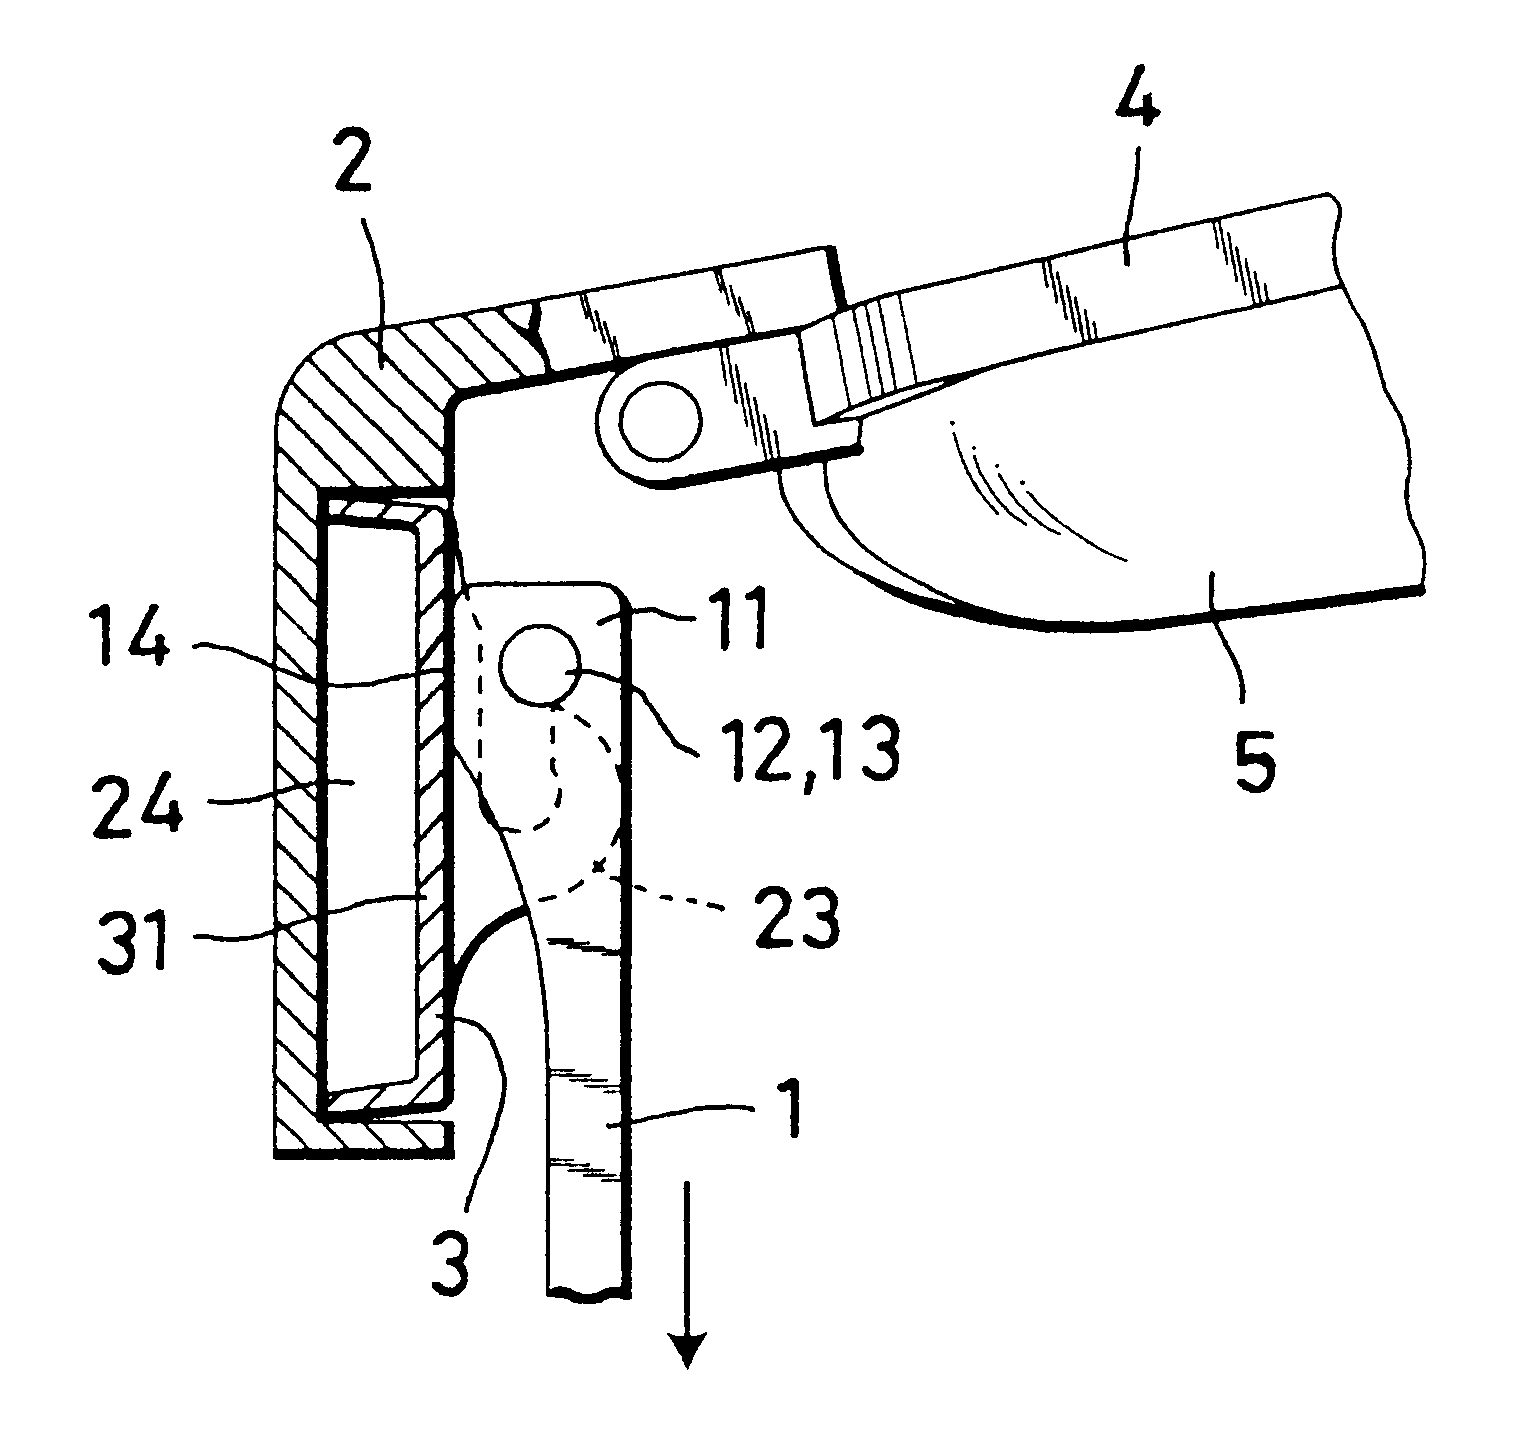 Link structure between a temple arm and a bracket for eyeglasses